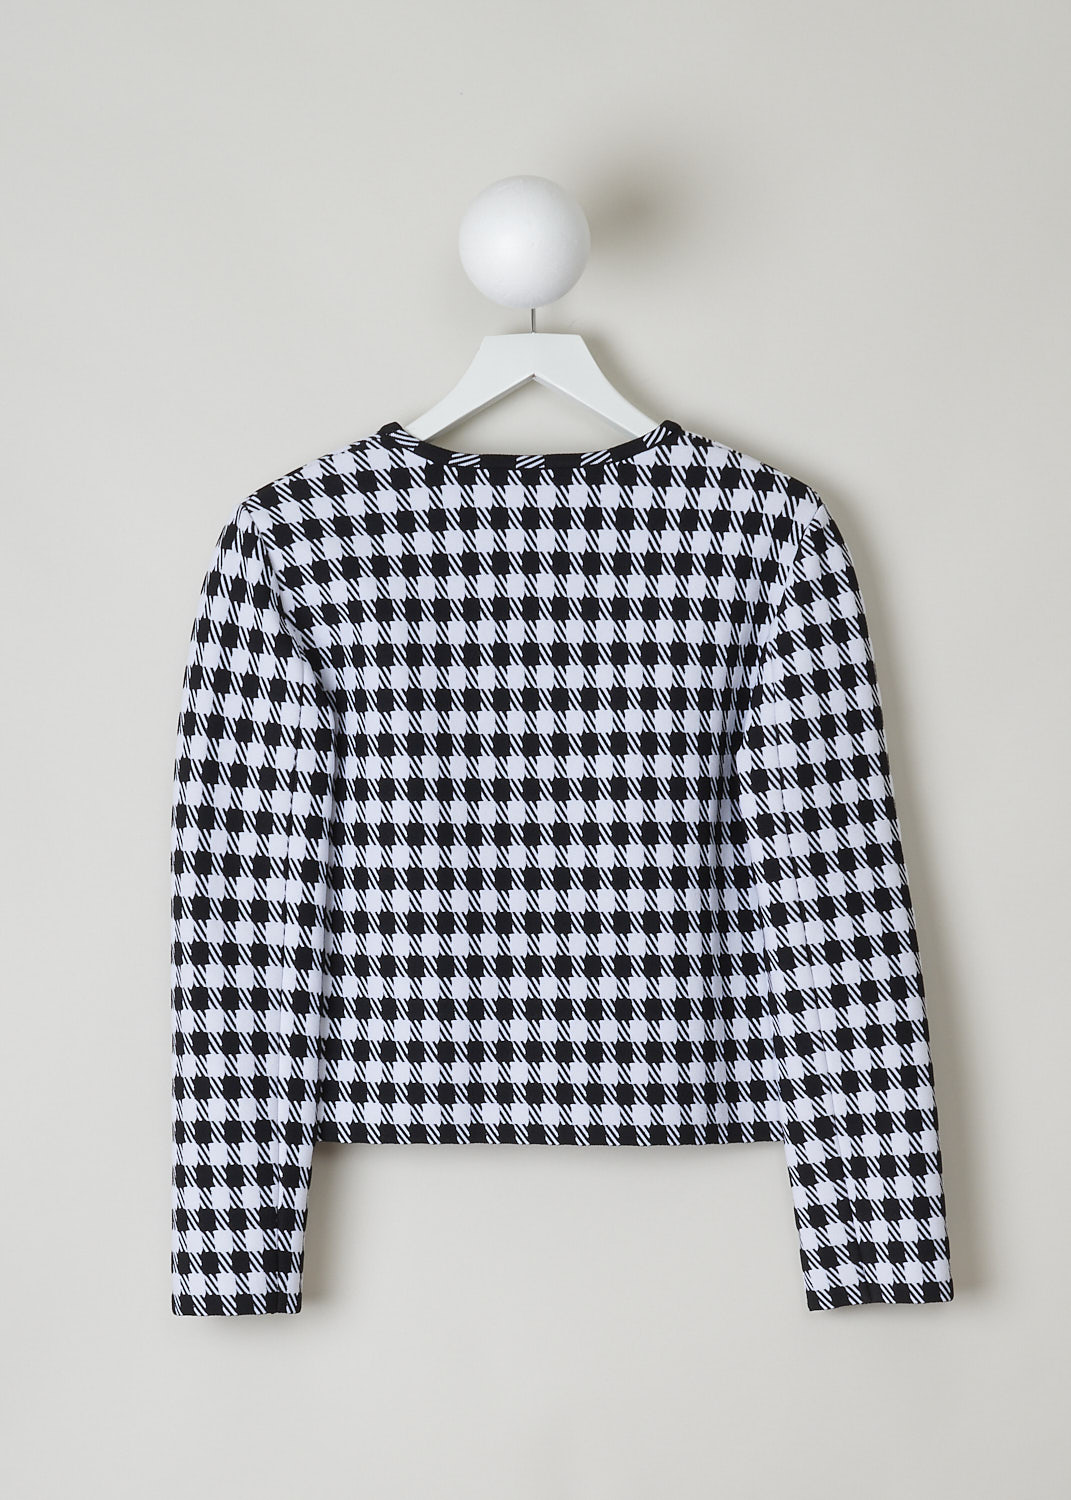 ALAÏA, CROPPED HOUNDSTOOTH PRINTED JACKET, AA9V10432M710_HOUNDSTOOTH_991, Black, White, Print, Back, This long sleeve jacket has a magnified black and white Houndstooth print throughout. The jacket has a cropped length, with the hem falling to the hip. The jacket has an open front with just a single hook-closure on the V-necks end. The jacket has shoulder pads.


